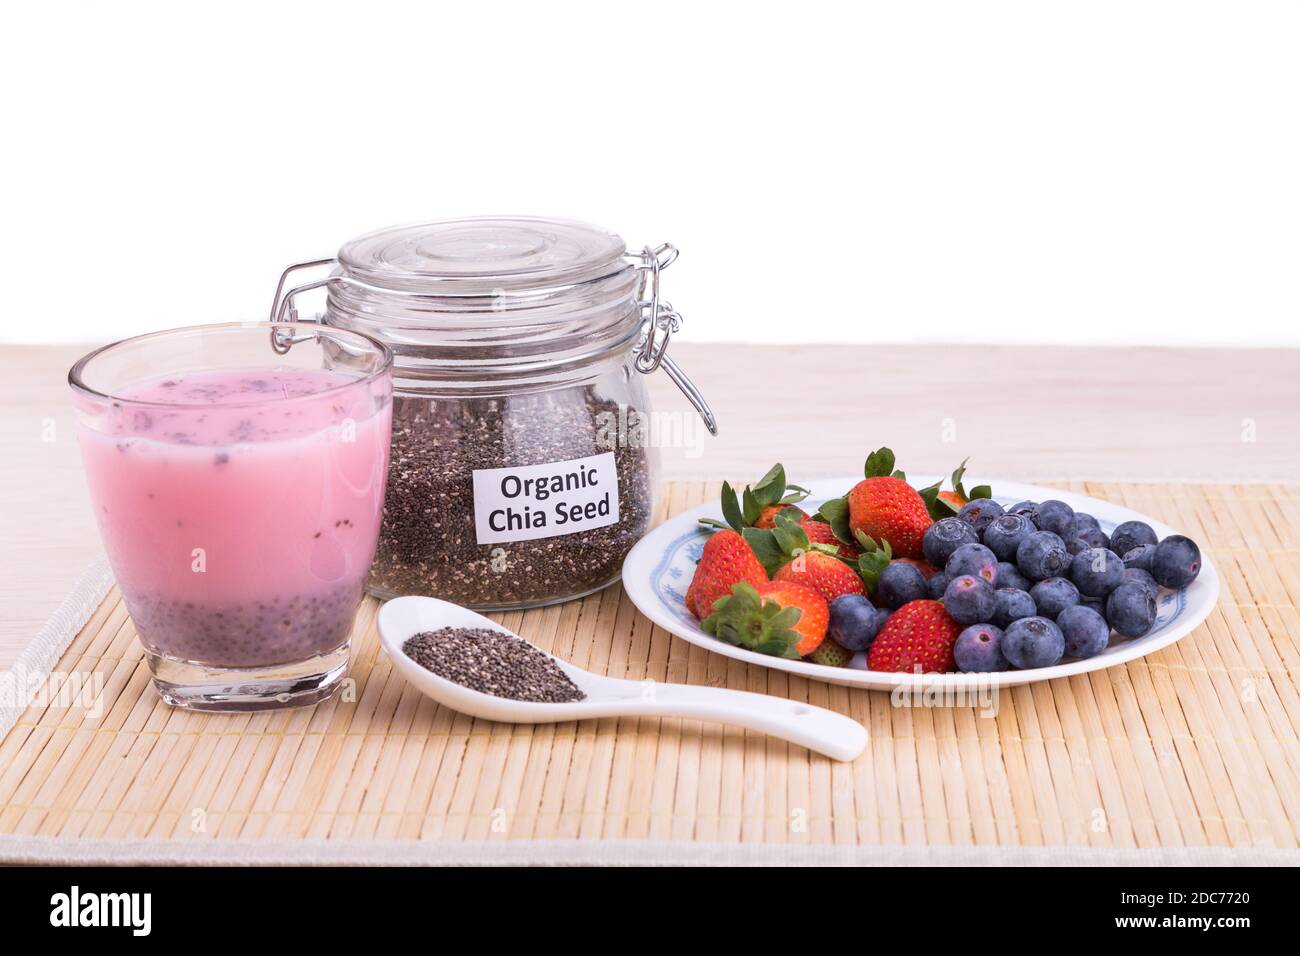 Chia seeds with fresh berries juice, healthy nutritious anti-oxidant superfood drinks Stock Photo